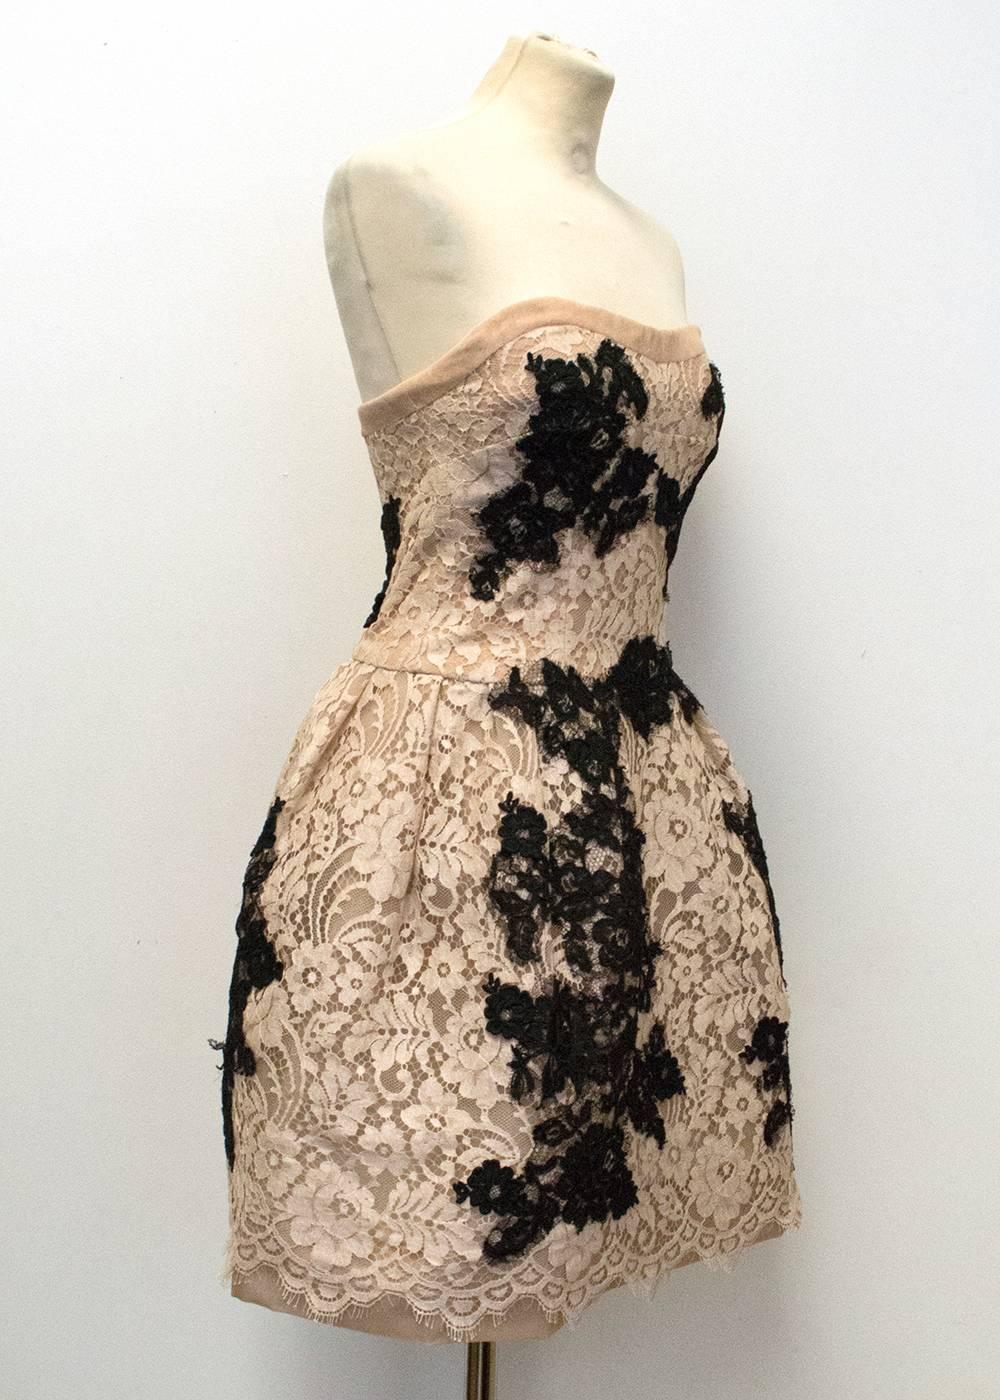 Dolce and Gabbana couture strapless mini dress featuring a nude underlay with Black and white floral lace applique. The bodice of the dress is boned and the skirt has volume created with horse hair facing. Light weight and slim fit with a concealed